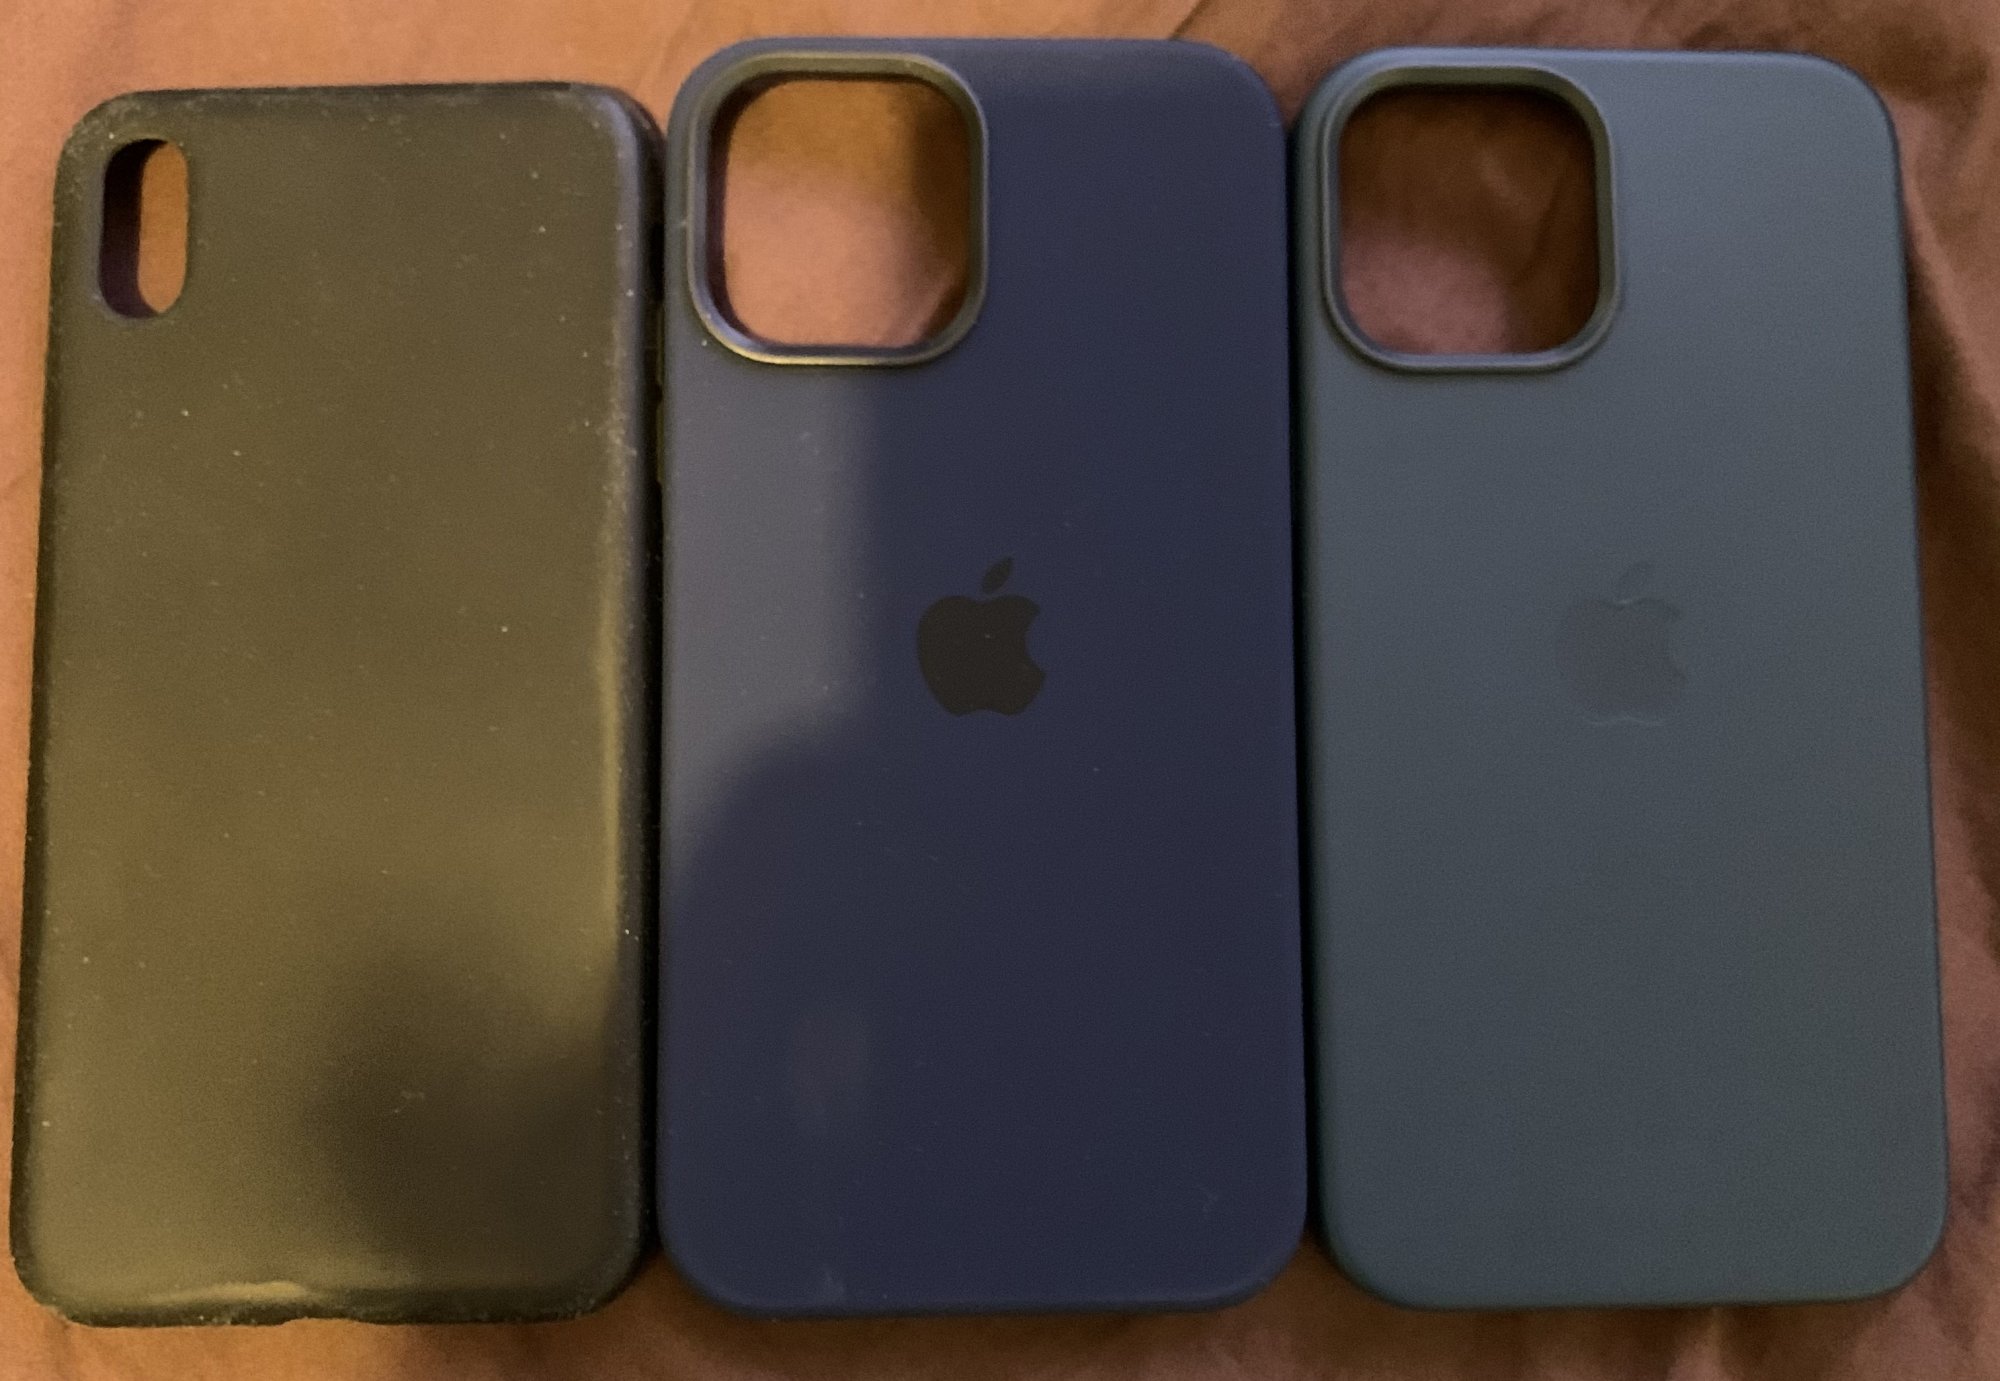 Iphone Xs Max Case Side By Side Iphone 12 Pro Max Cases Hardly No Difference Pictures Macrumors Forums